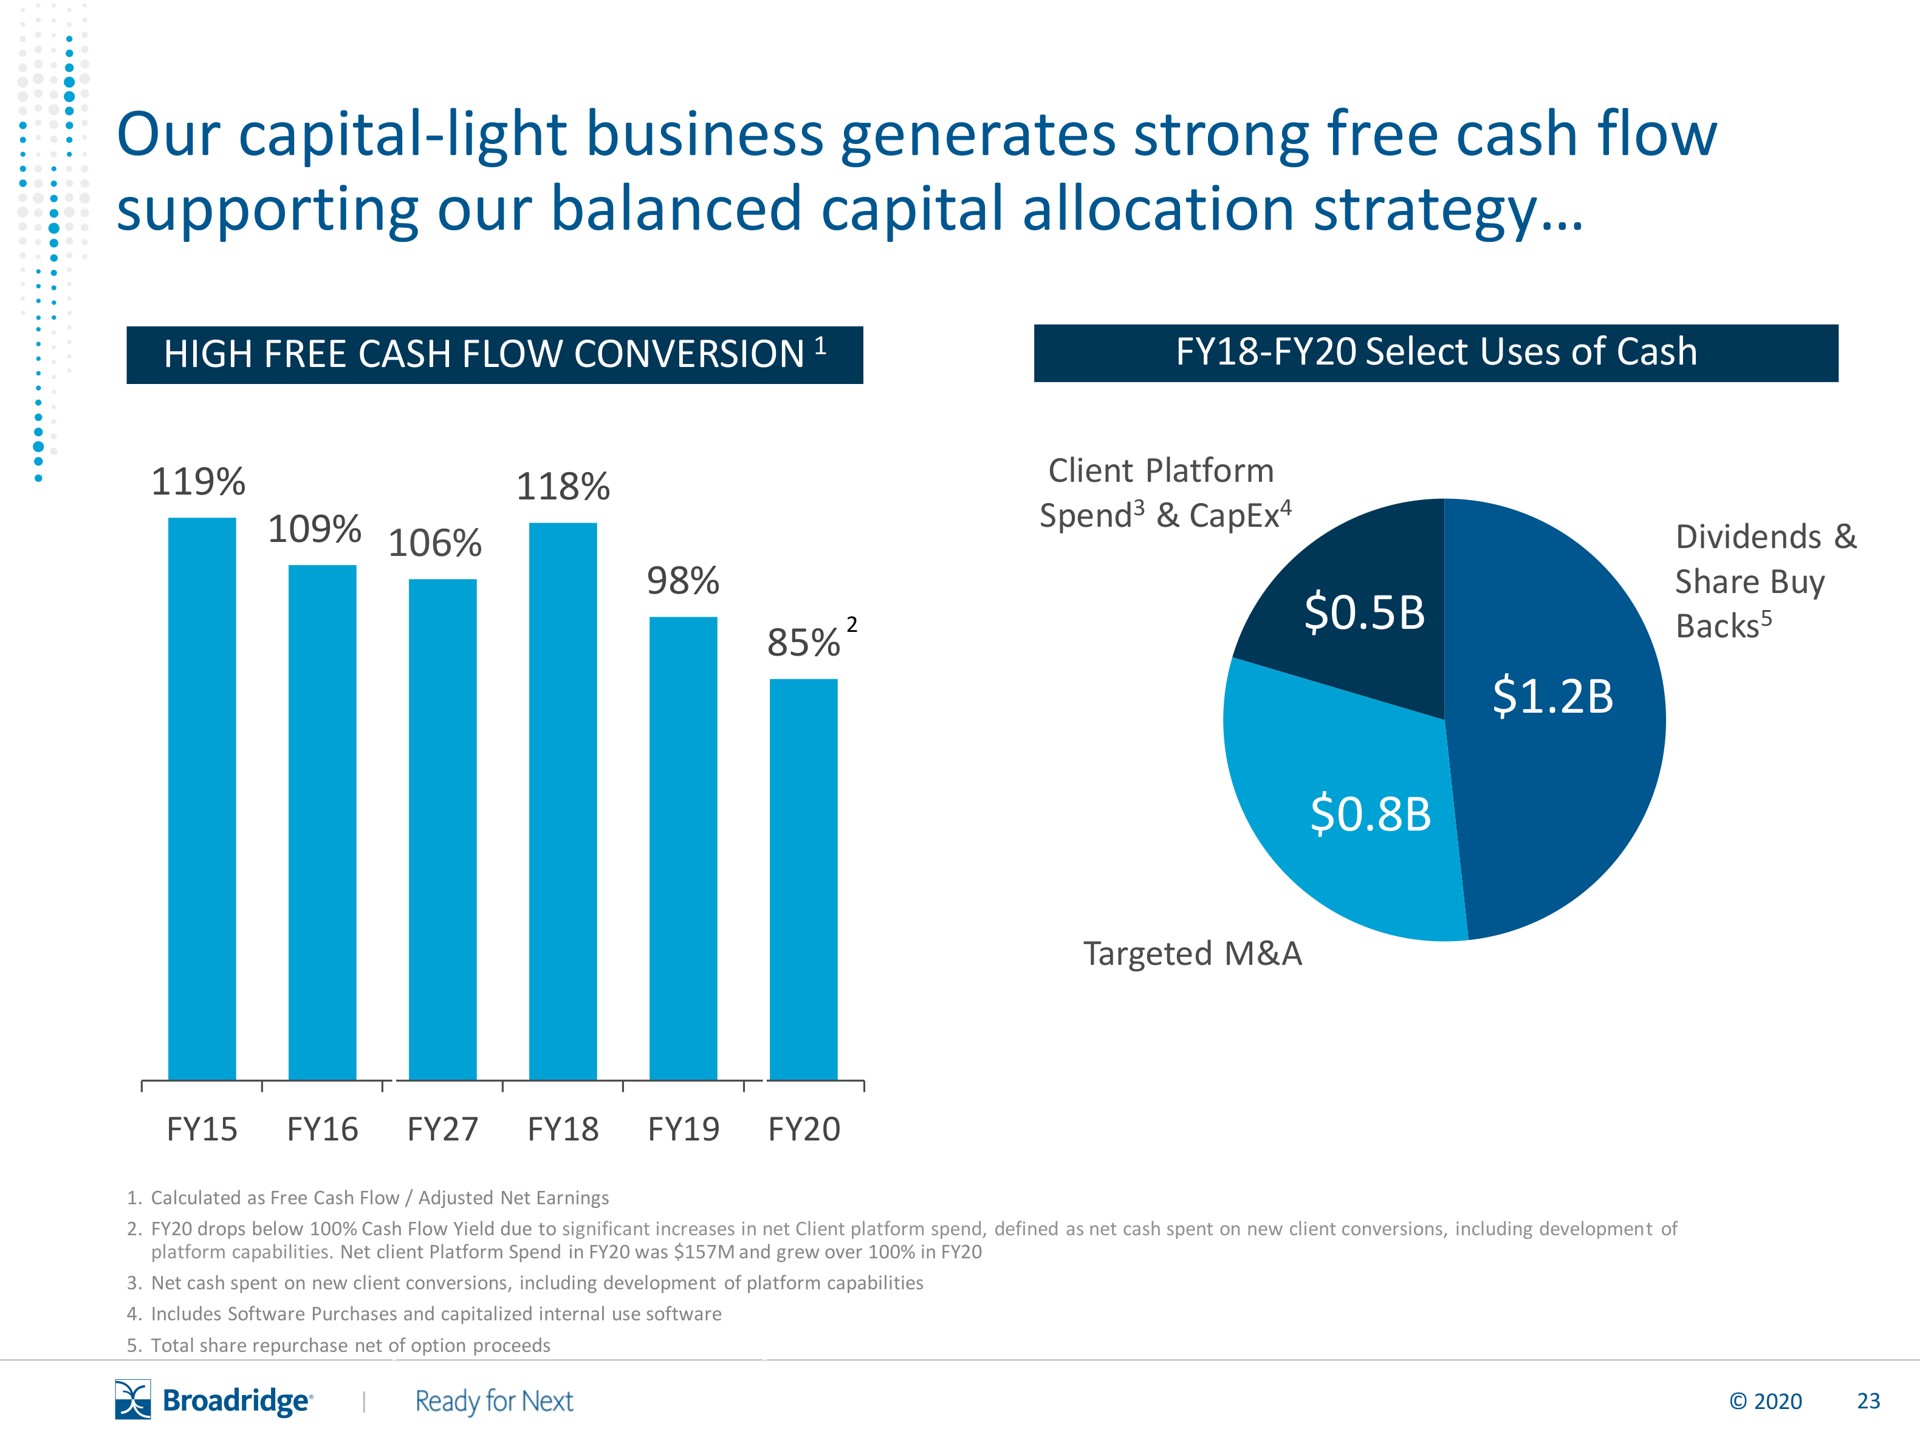 our capital light business generates strong free cash flow supporting our balanced capital allocation strategy | Broadridge Financial Solutions